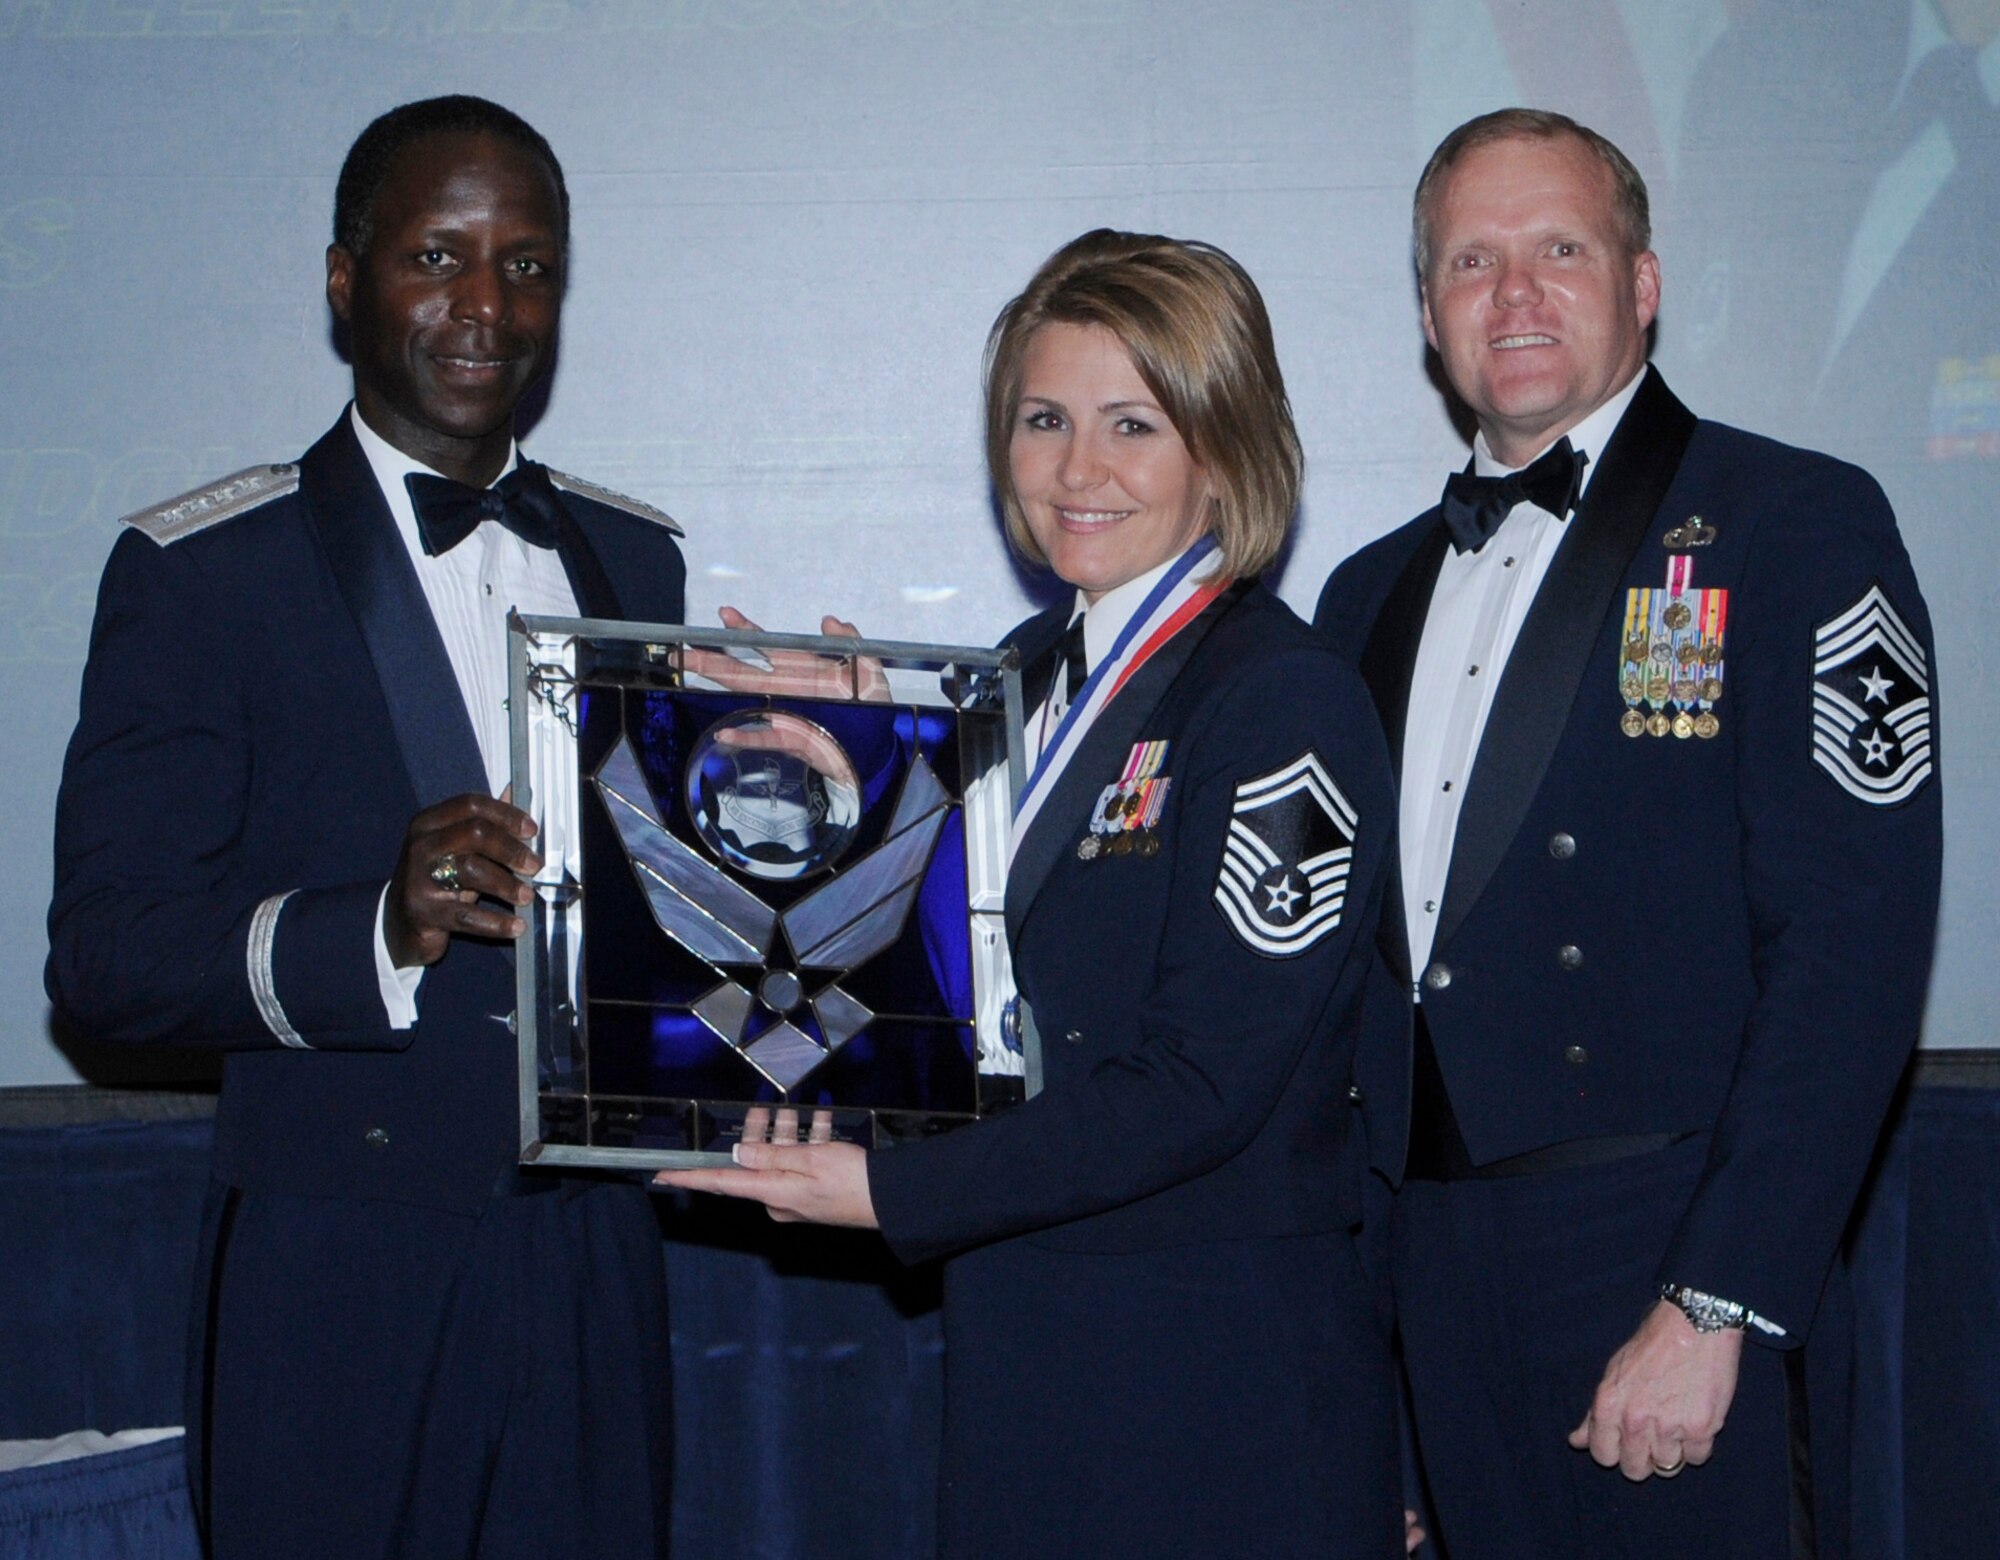 General Edward Rice, Air Education And Training Command commander and Chief Master Sergeant James Cody, Air Education and Training Command , command chief presents award to Senior Master Sergeant Kathleen M. Cool, Air Force Recruiting Service, Randolph Air Force Base Texas, Senior Noncommissioned Officer of the Year.  Ceremony was held at the Parr Officer Club at Randolph Air Force Base, Texas on March 18.(U.S. Air Force photo/by Don Lindsey).